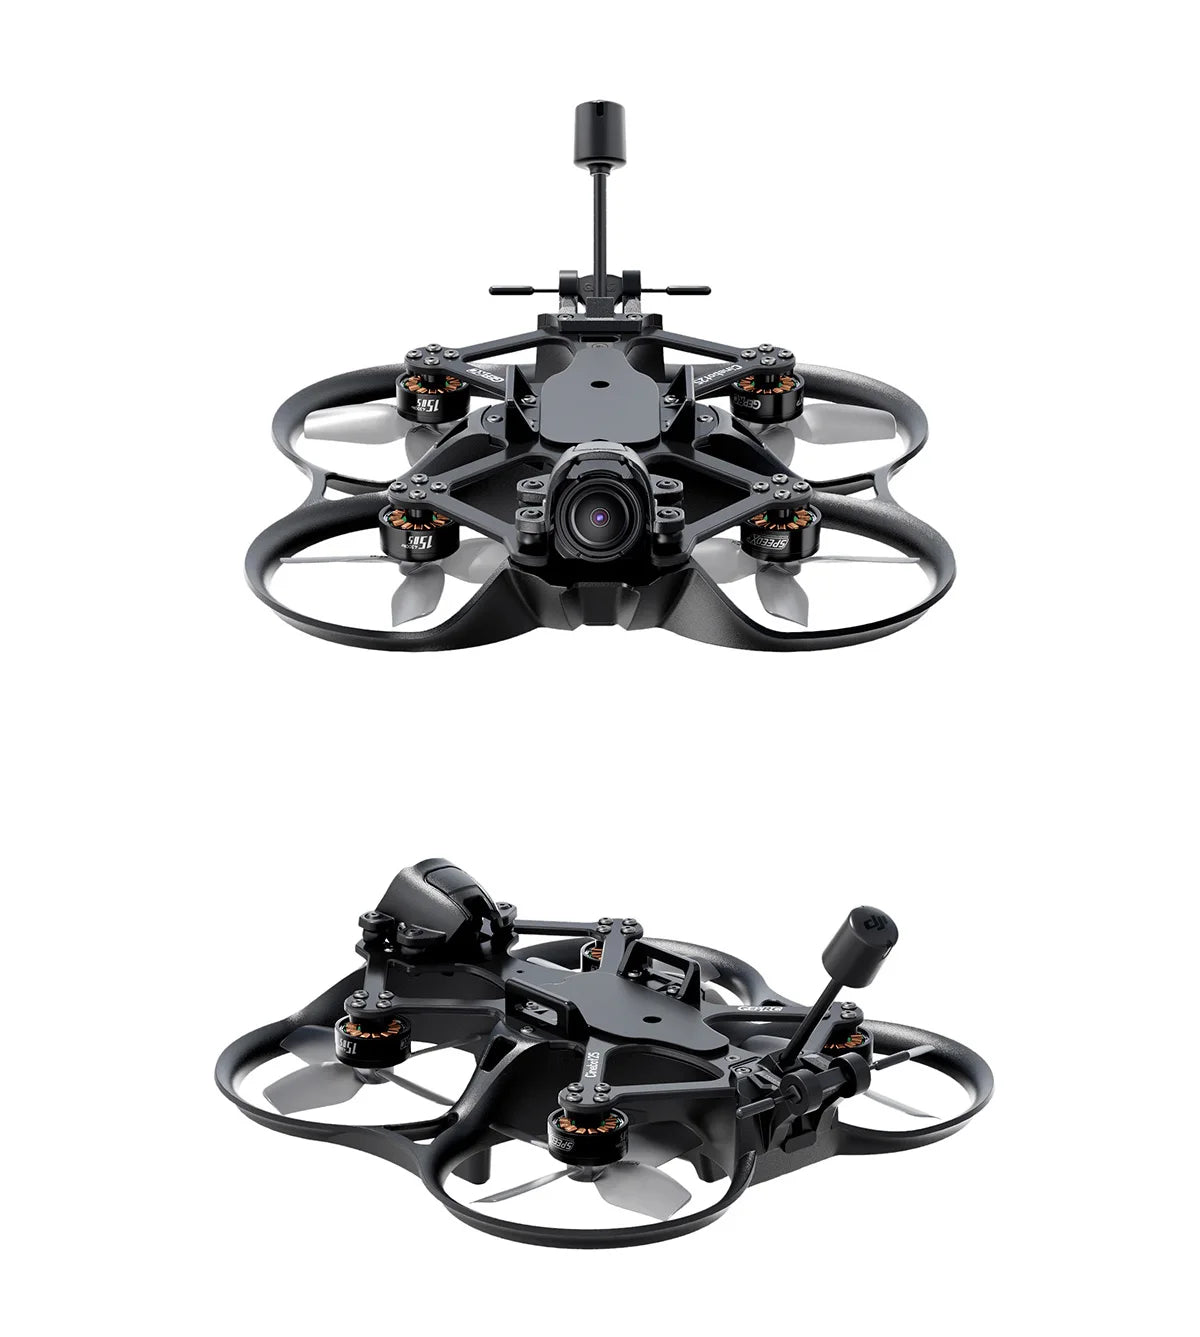 GEPRC Cinebot25 HD Wasp FPV Drone, crashes when components have aged or been damaged .